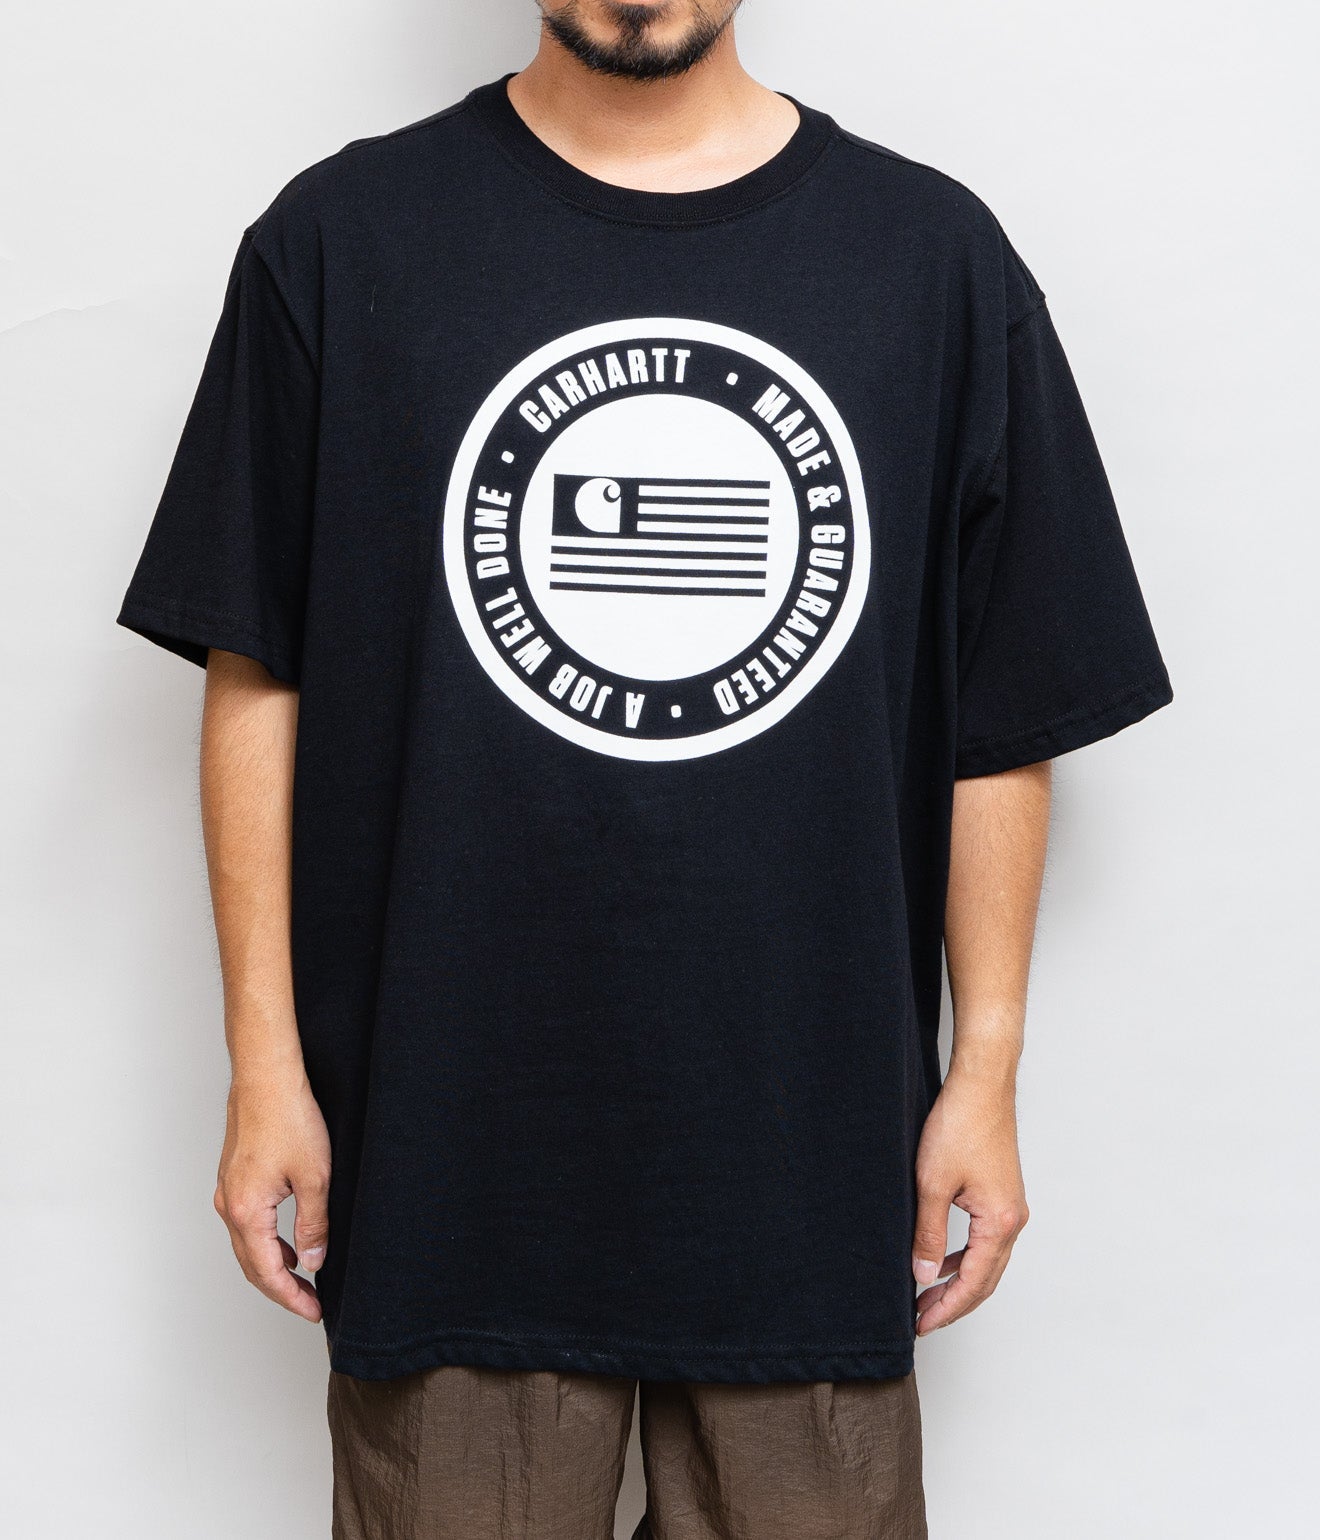 Carhartt USA "Relaxed Fit Flag T-Shirt" Made in USA - WEAREALLANIMALS